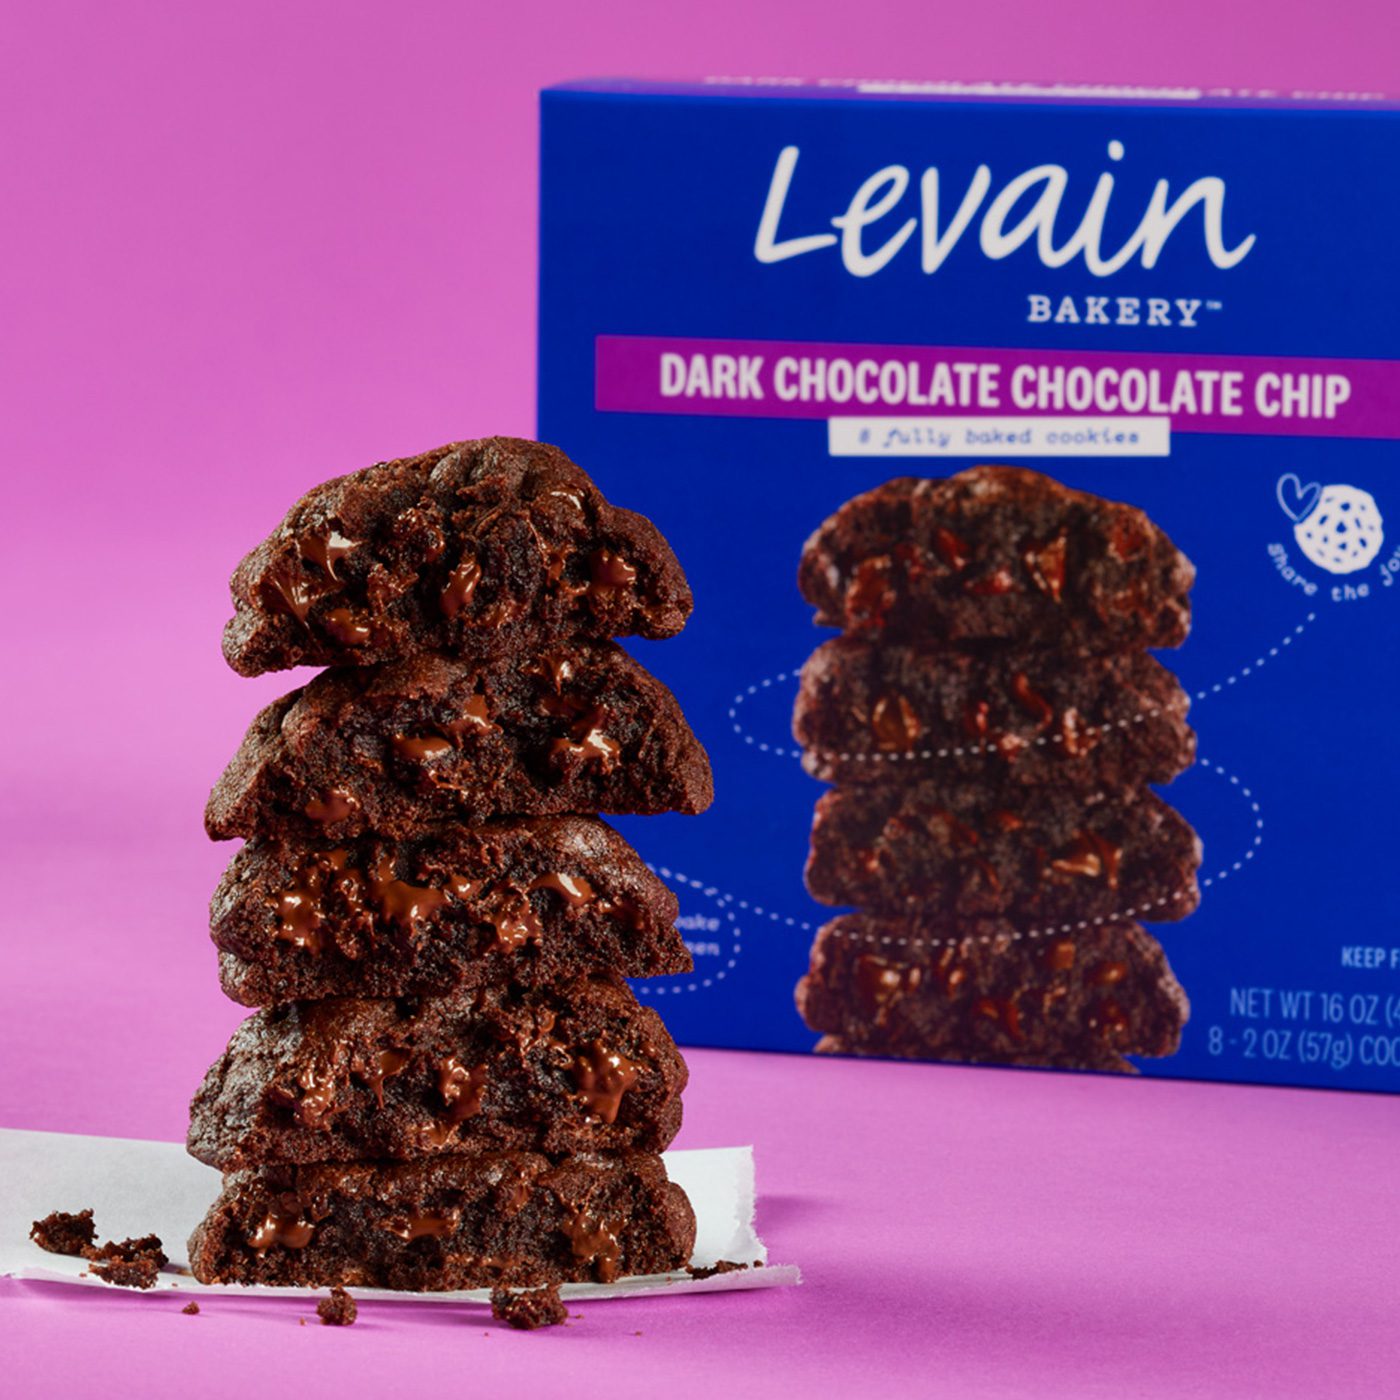 An open stack of 5 Levain Bakery Dark Chocolate Chocolate Chip cookies, revealing a gooey chocolate center, photographed on a purple-colored background. Featured next to the cookie stack is a blue retail box of Levain Bakery Dark Chocolate Chocolate Chip Frozen Cookies.